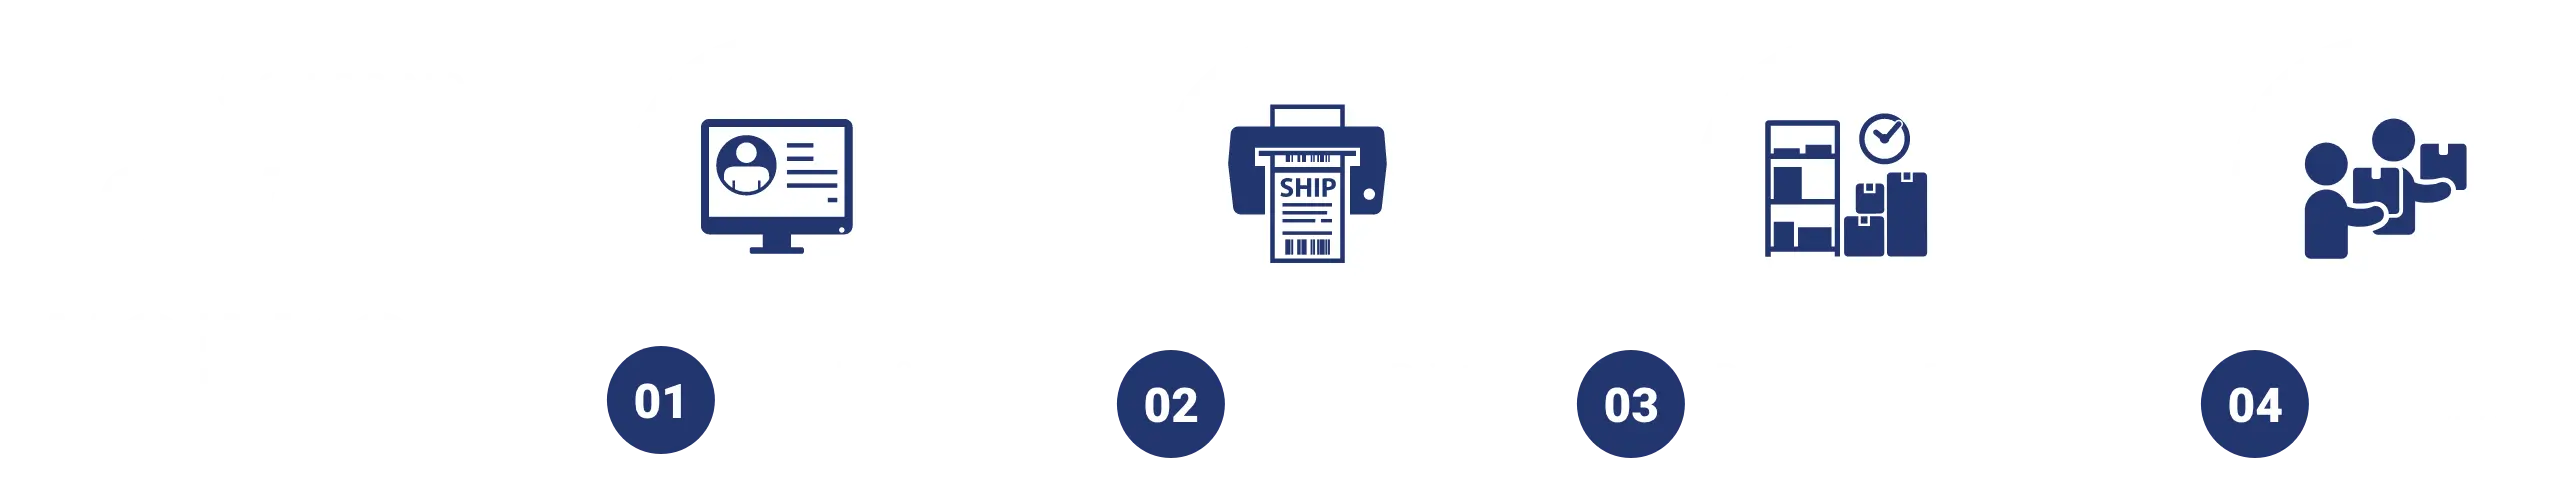 Infographic explaining how 'Ship to School' works. Step 1 is to sign up and order supplies. Step 2 is to pack and print labels. Step 3 is having FedEx pick it up. Step 4 is having us deliver it.